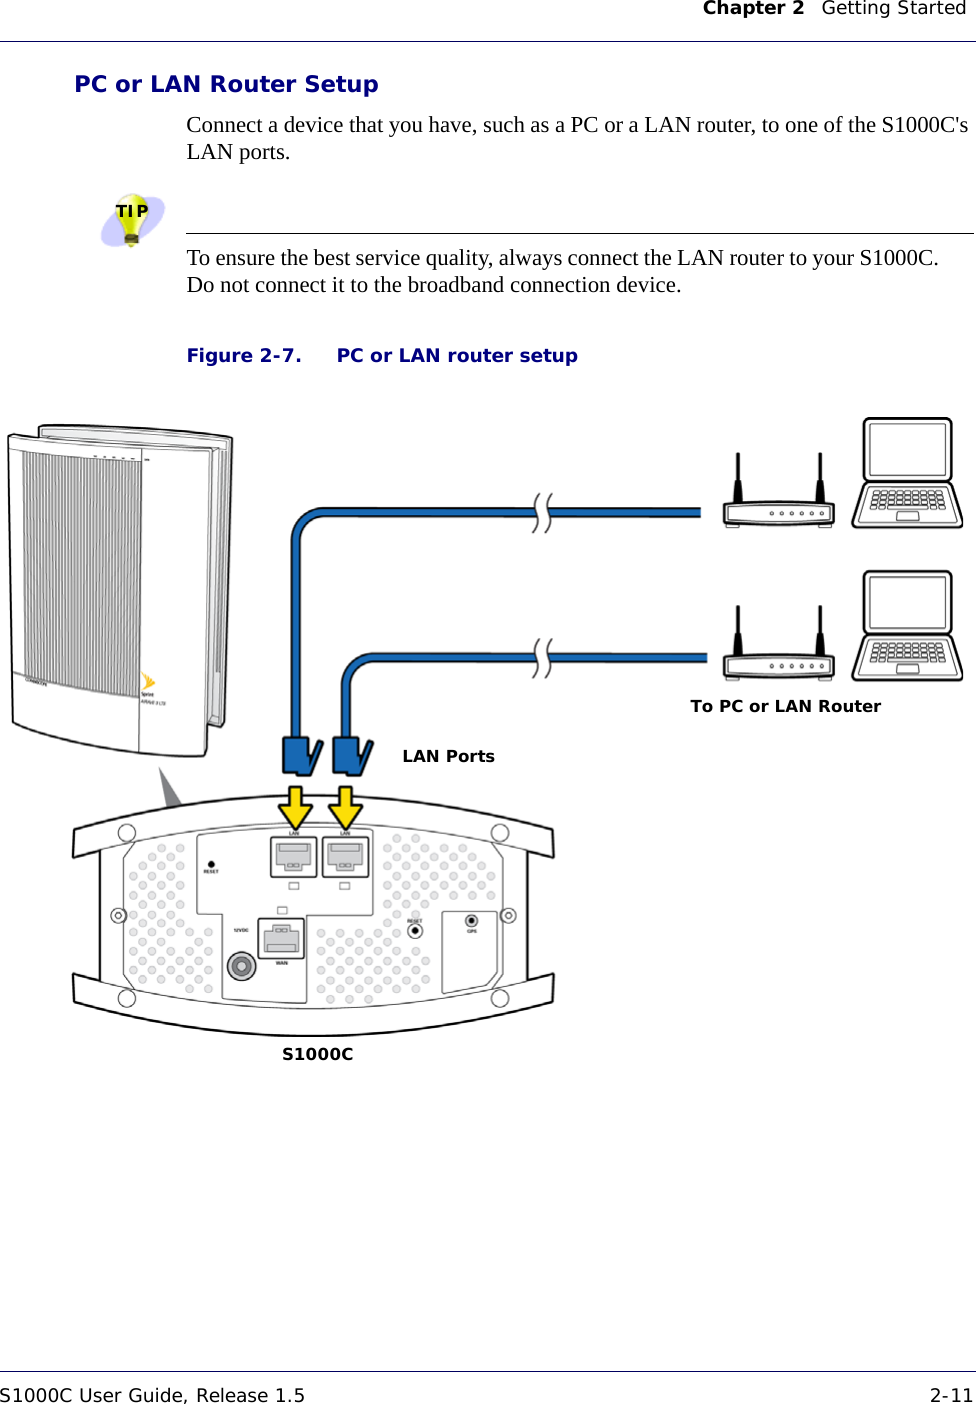 Chapter 2    Getting Started S1000C User Guide, Release 1.5 2-11DRAFTPC or LAN Router SetupConnect a device that you have, such as a PC or a LAN router, to one of the S1000C&apos;s LAN ports.TIPTo ensure the best service quality, always connect the LAN router to your S1000C. Do not connect it to the broadband connection device.Figure 2-7.To PC or LAN RouterLAN PortsS1000CPC or LAN router setup